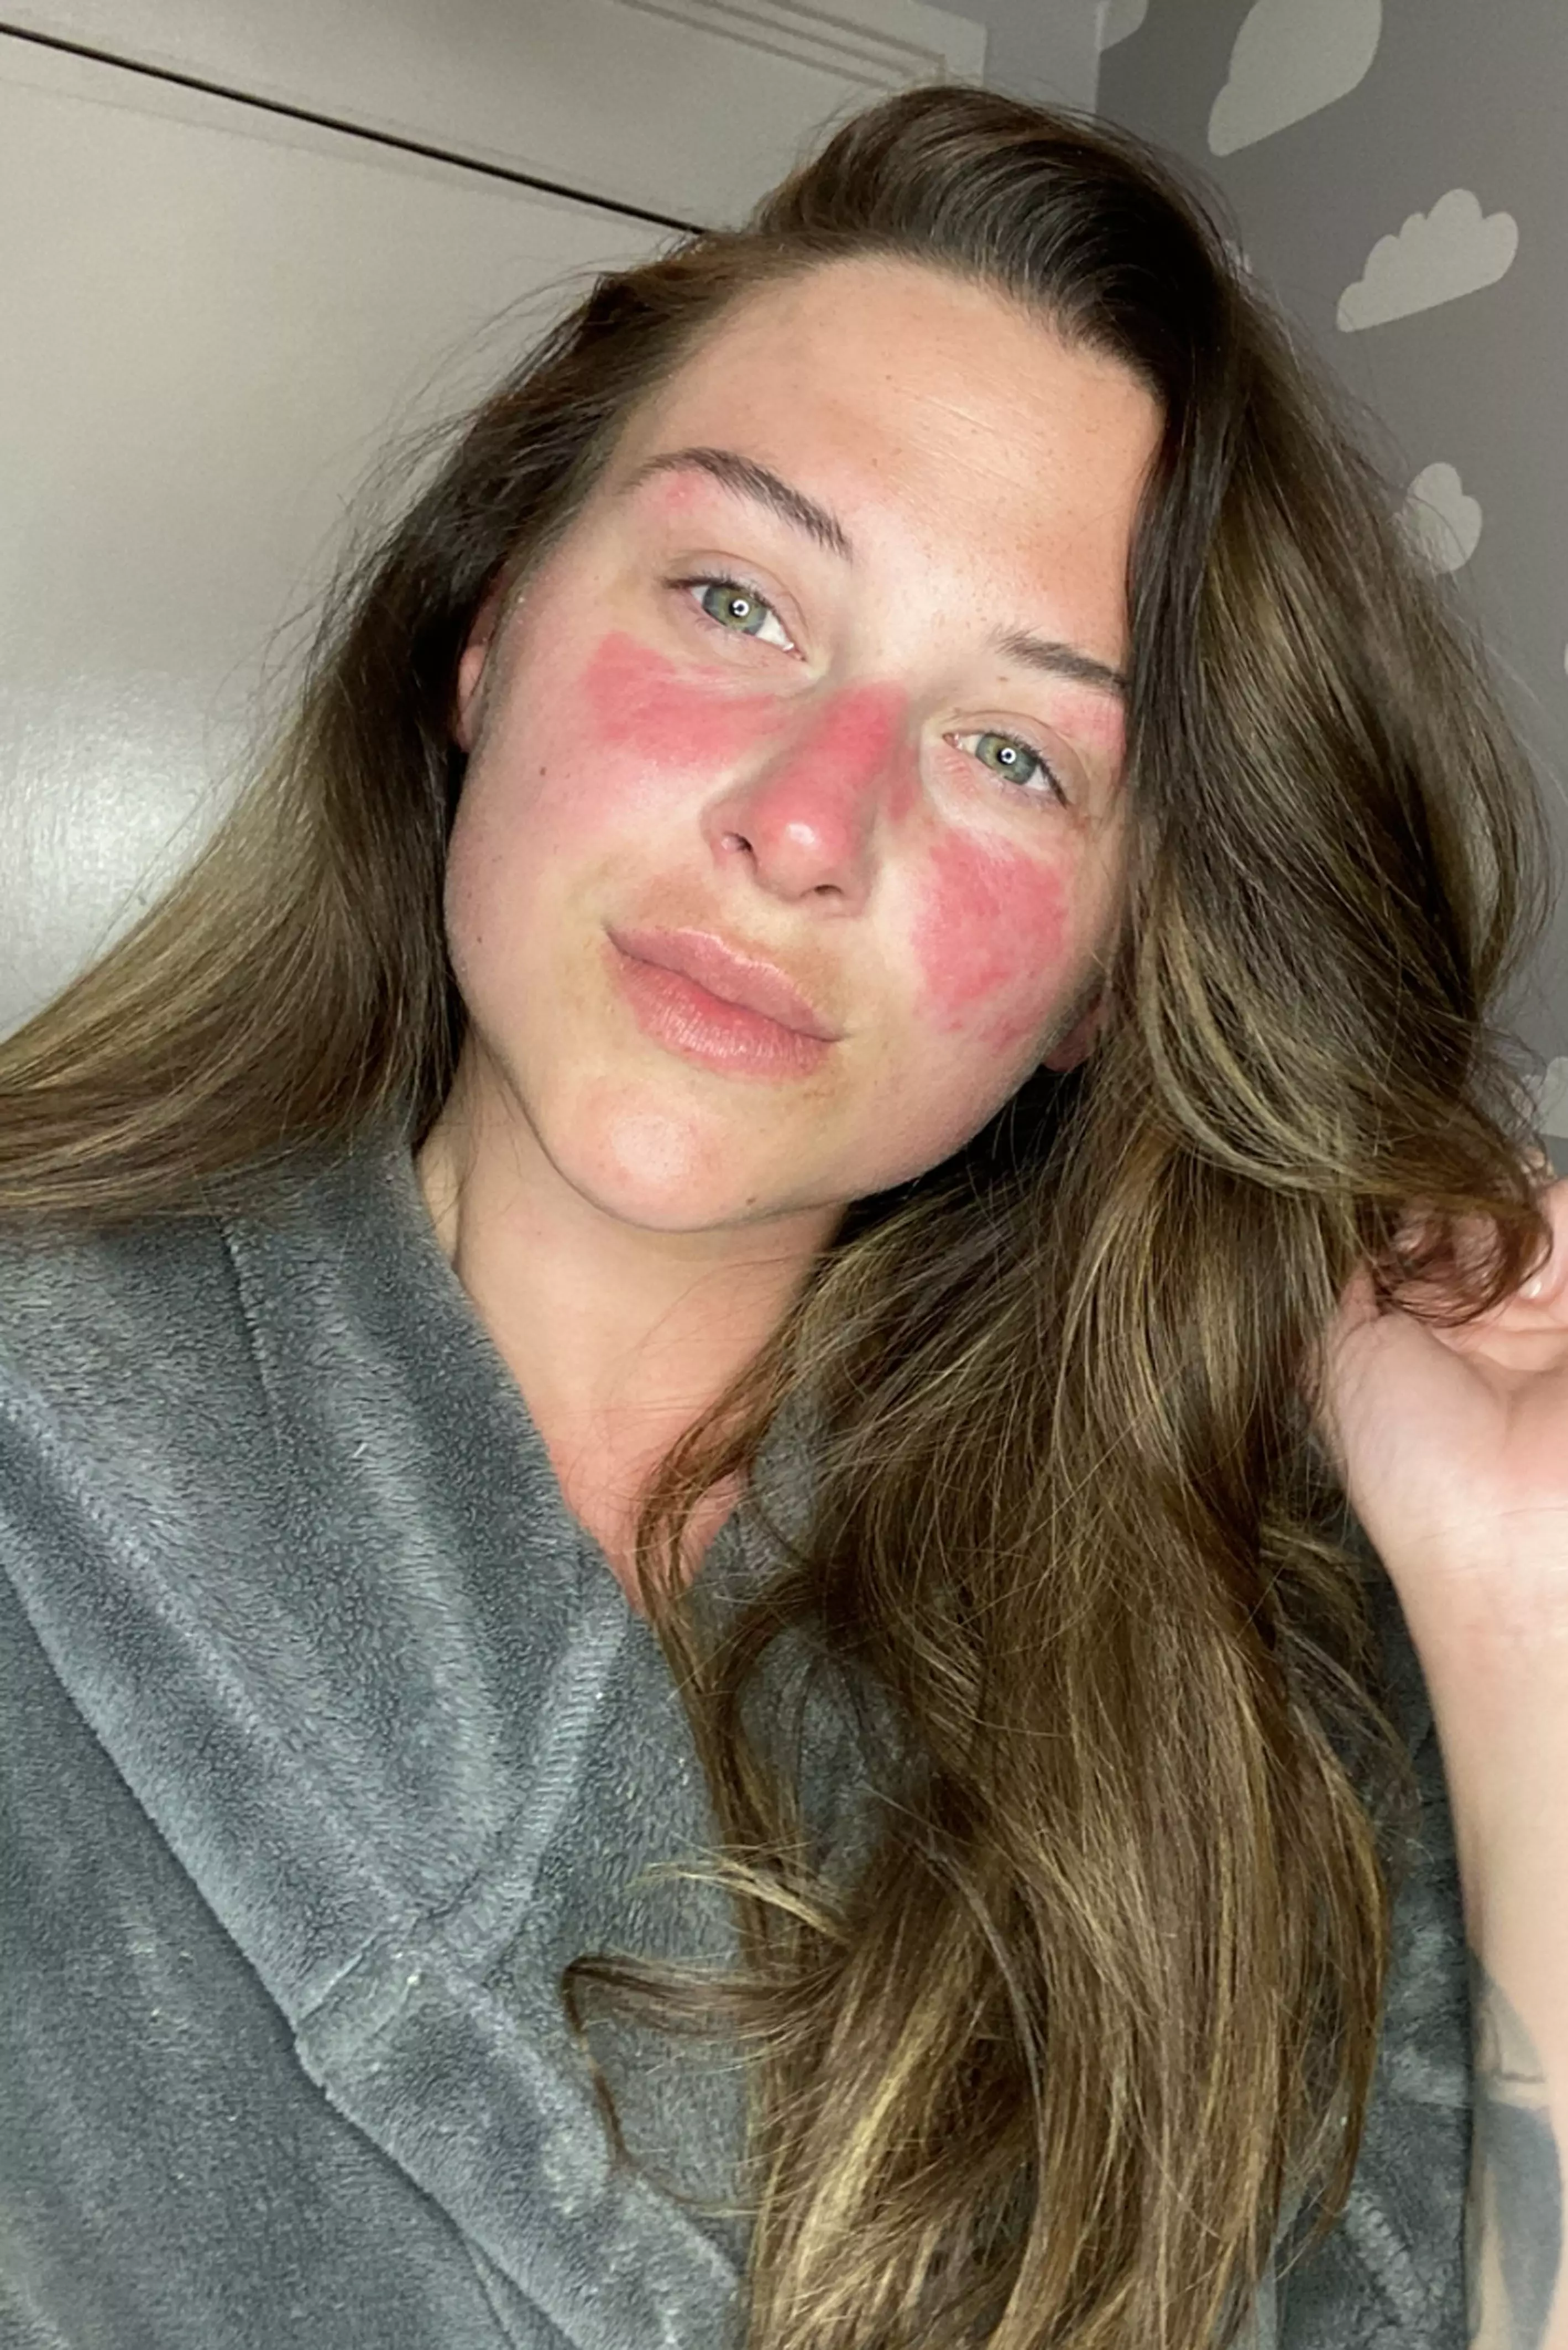 Lauren revealed that she used to feel insecure about the red patches on her face after bullies called her 'snake skin' (